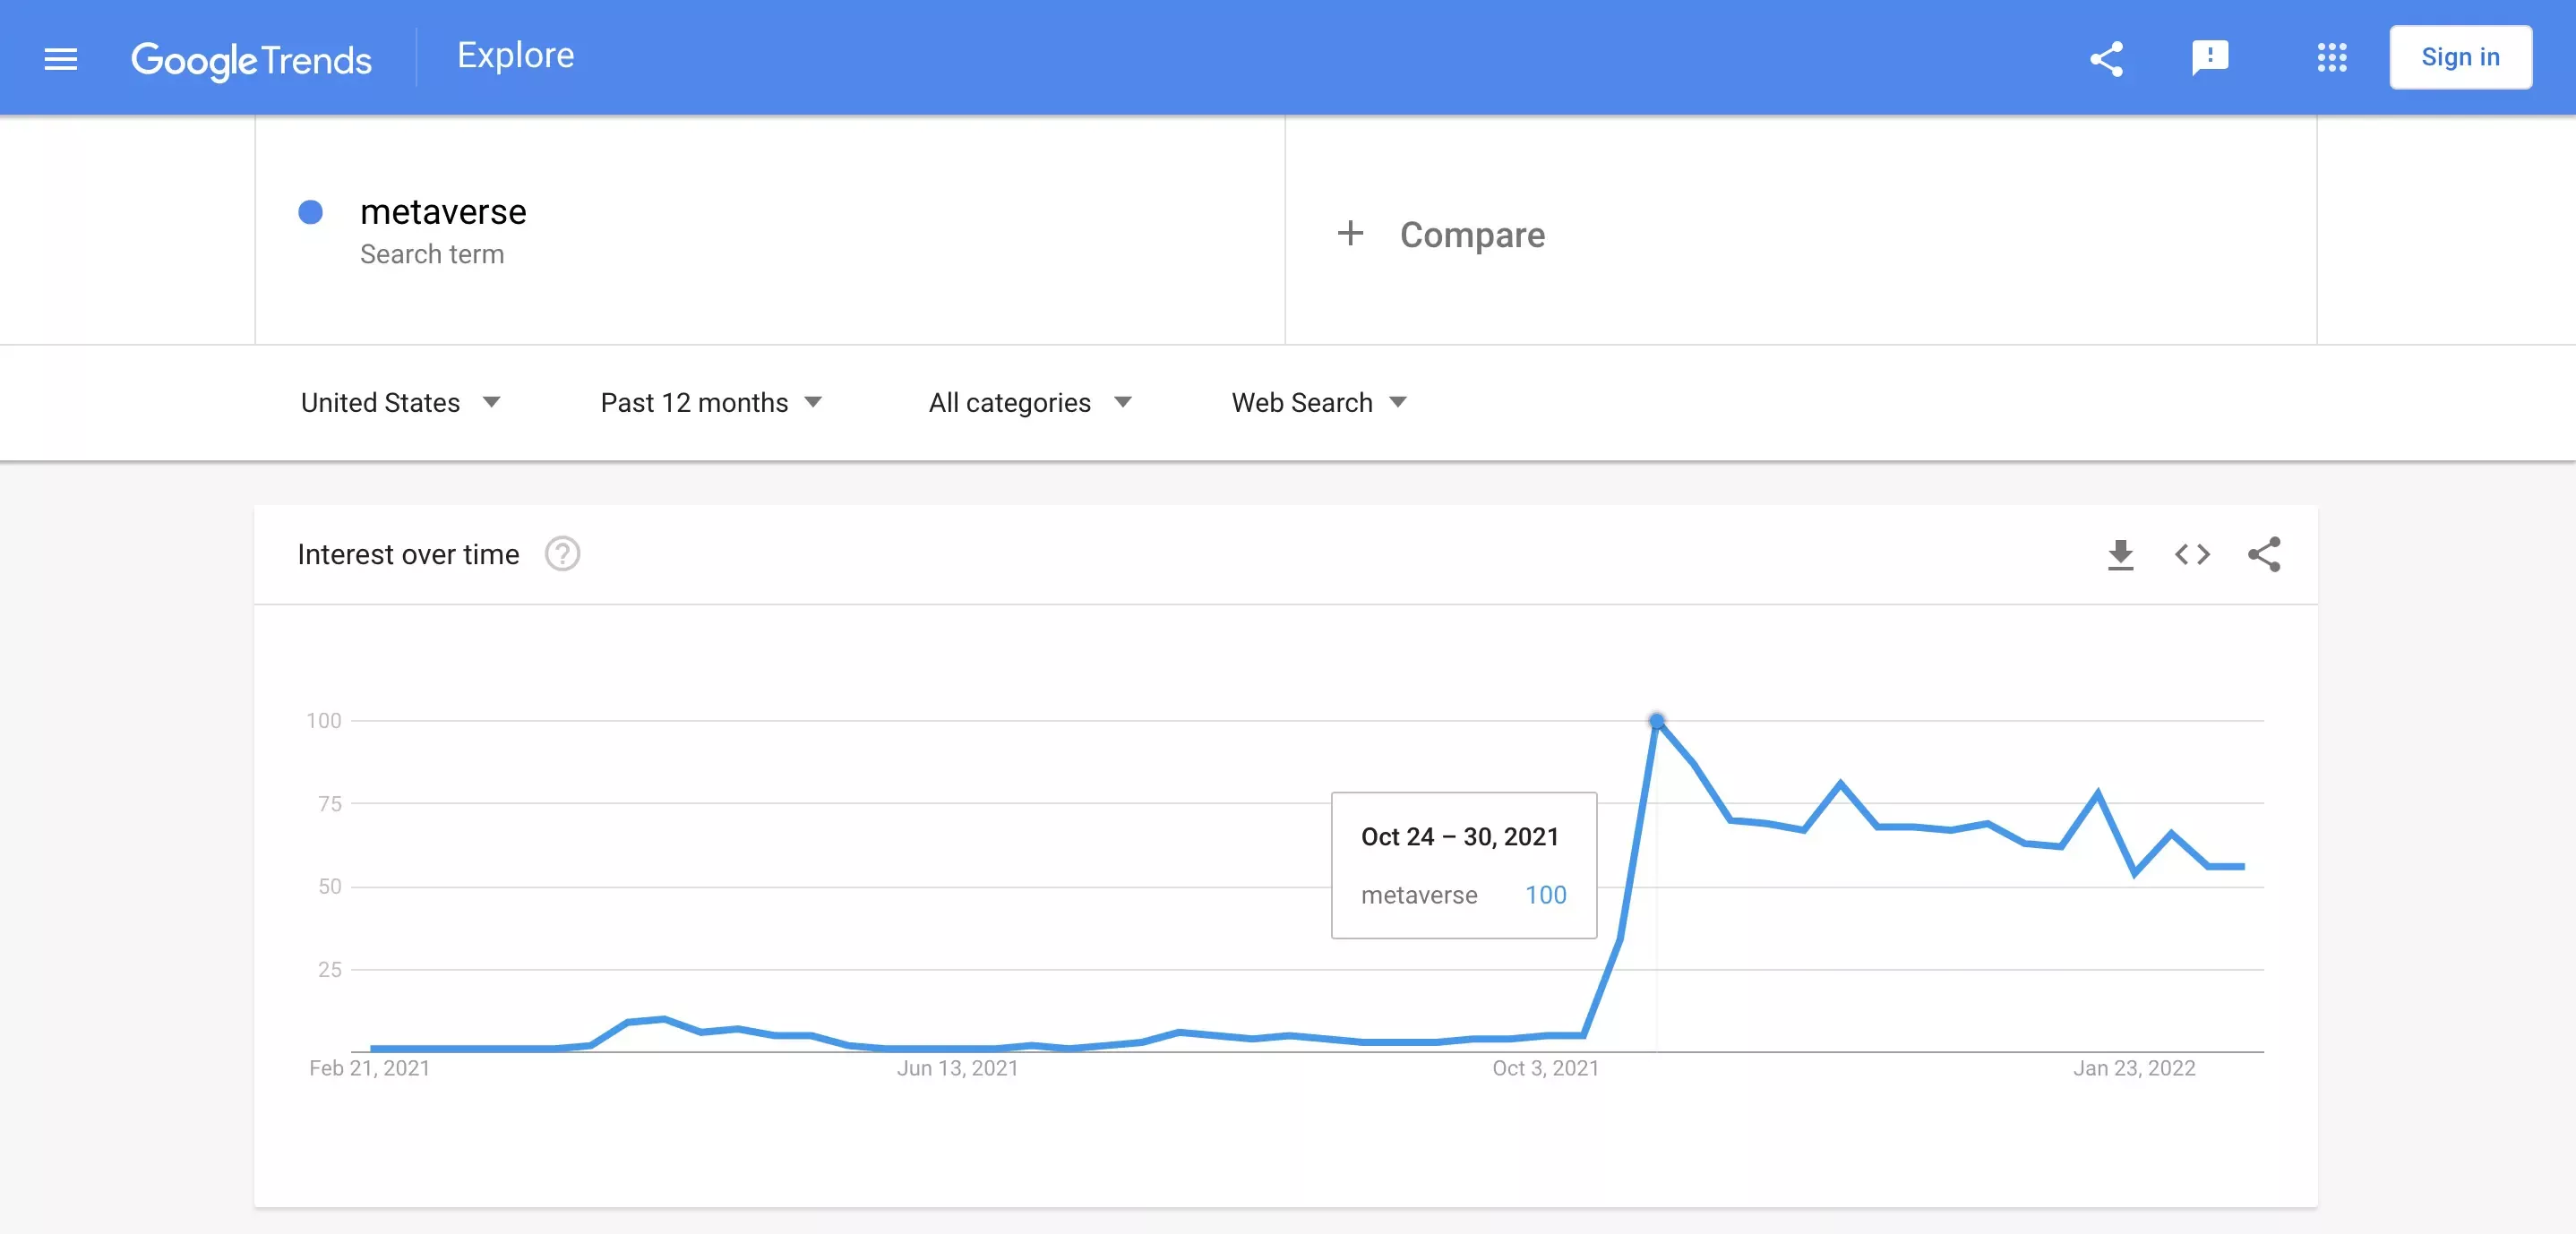 Google Trends report on the interest in the word Metaverse over time (February 2021/2022)